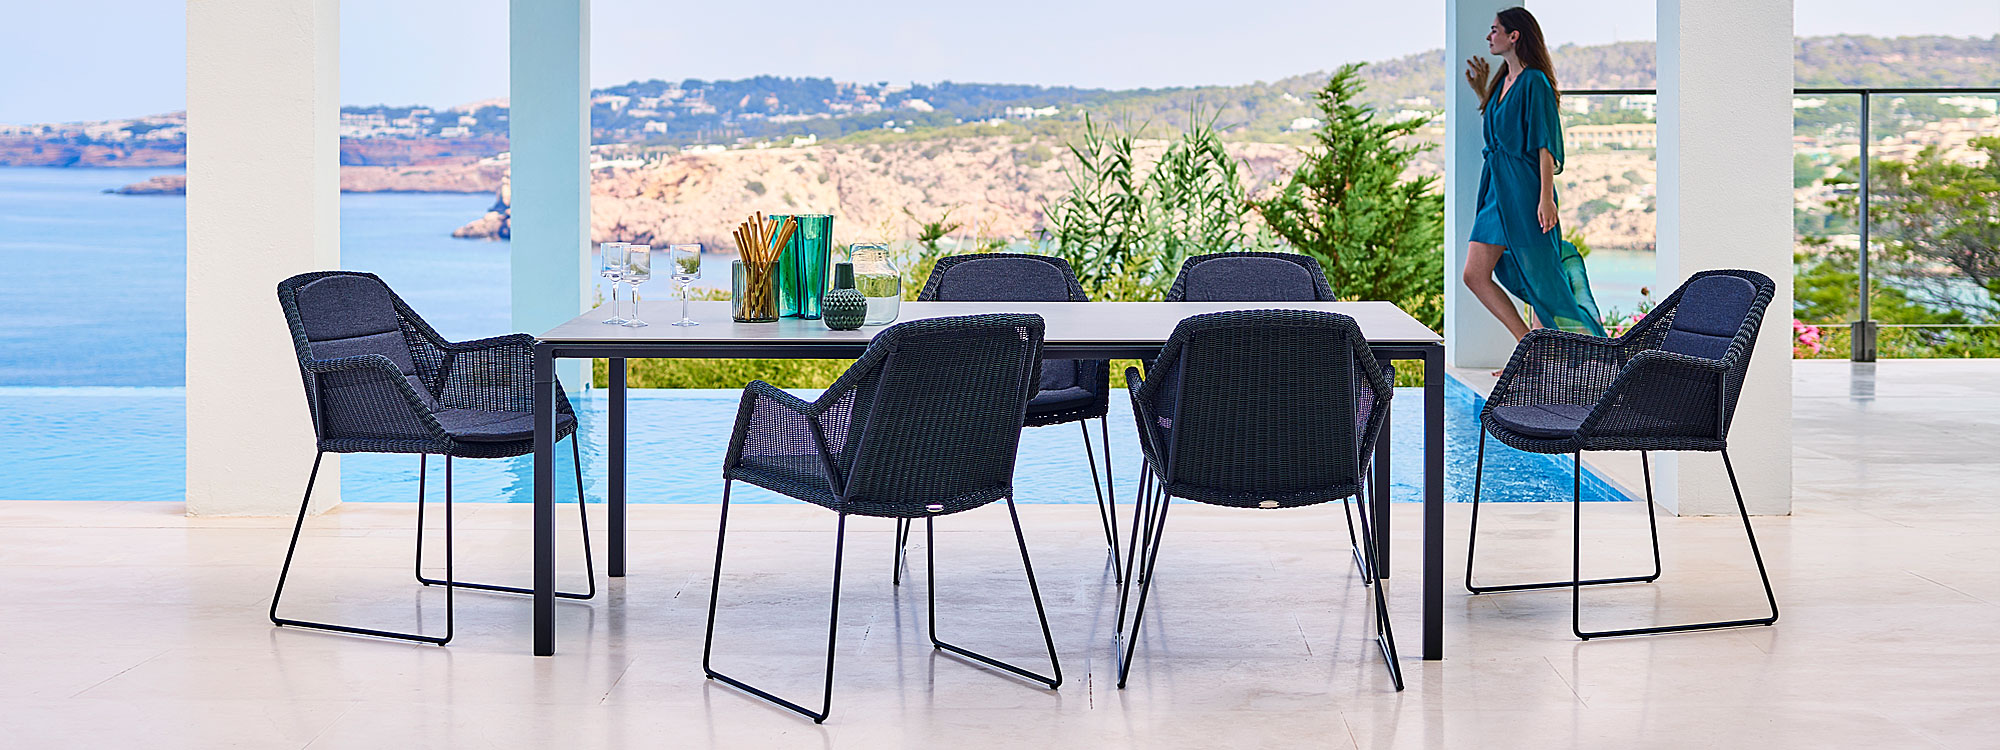 Breeze garden chair is made in high quality materials and requires little or no maintenance